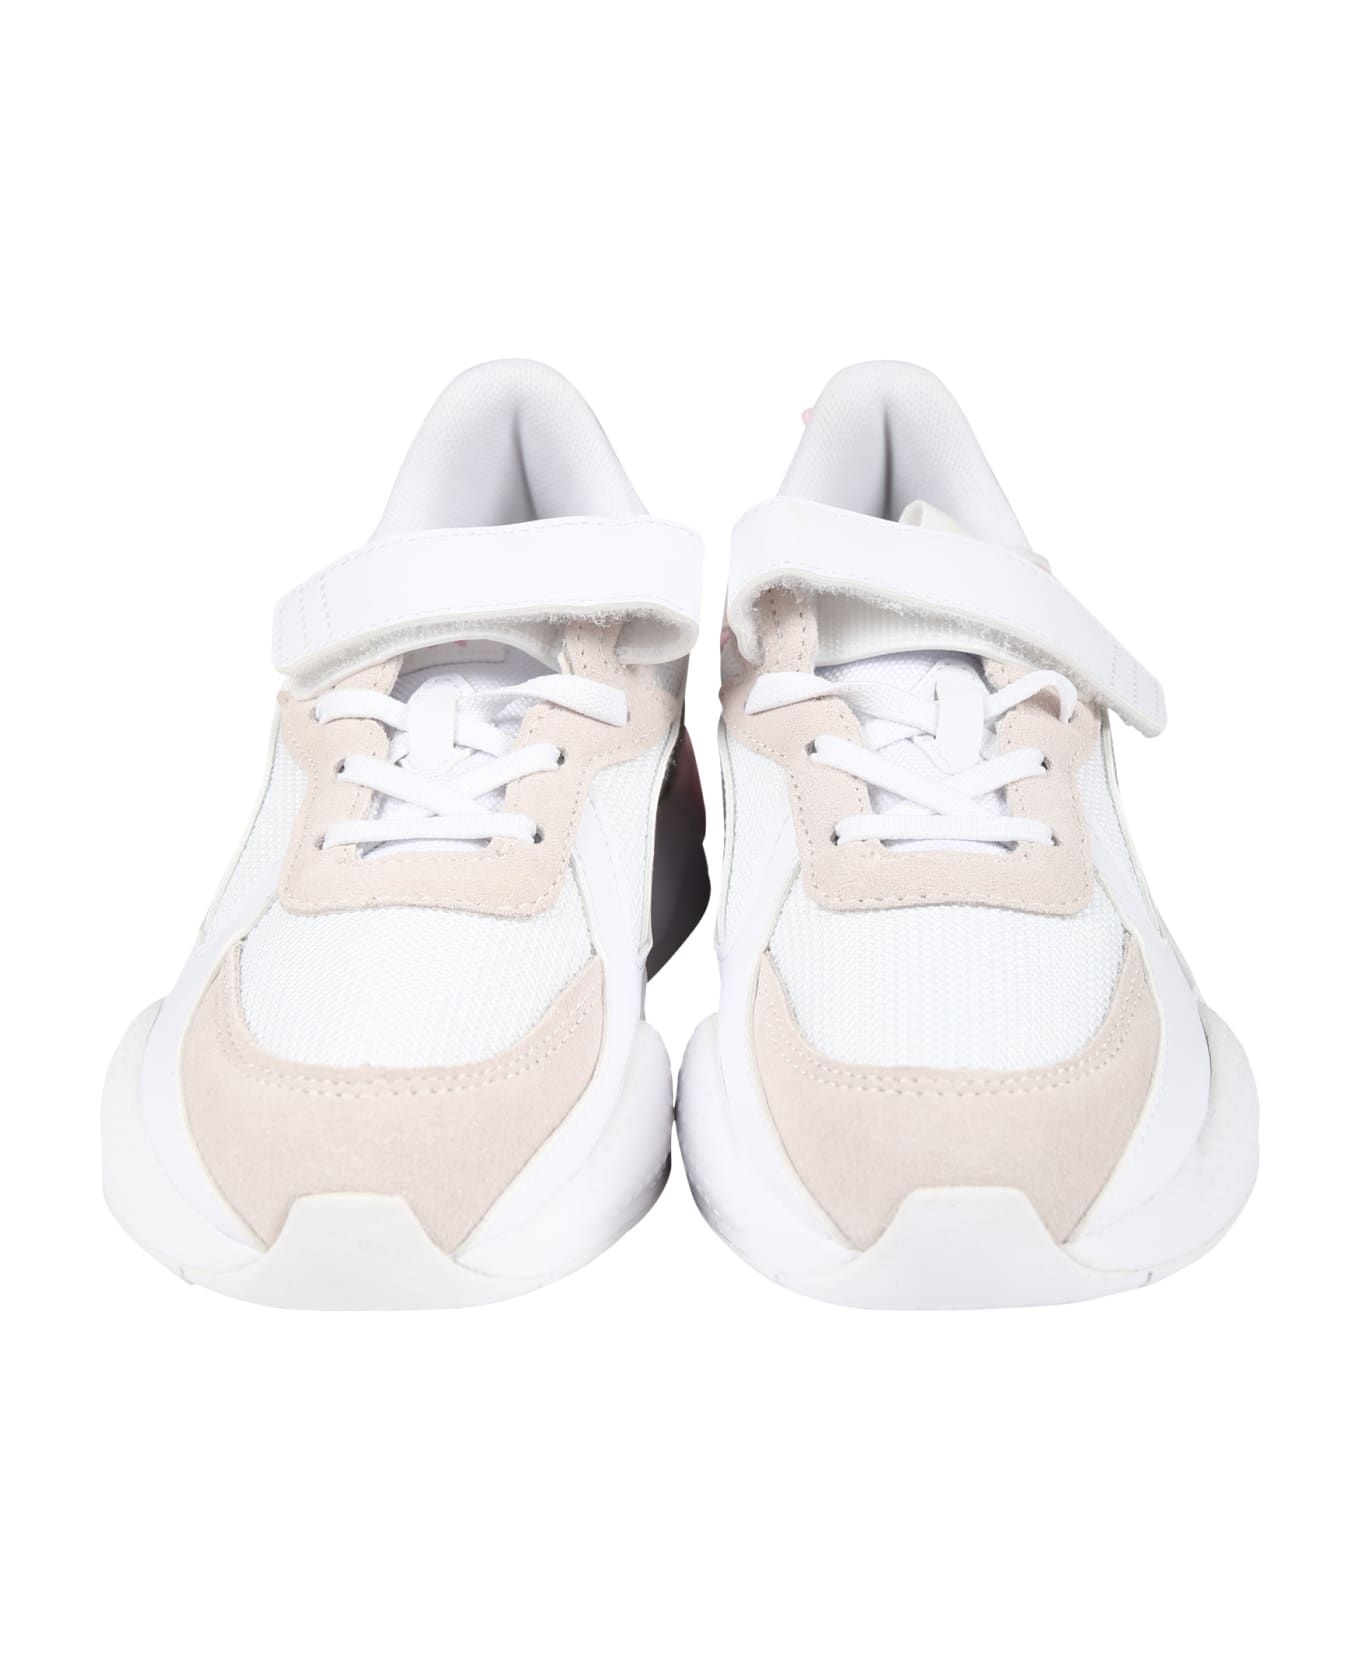 Puma White Sneakers For Girl With Logo - Multicolor シューズ